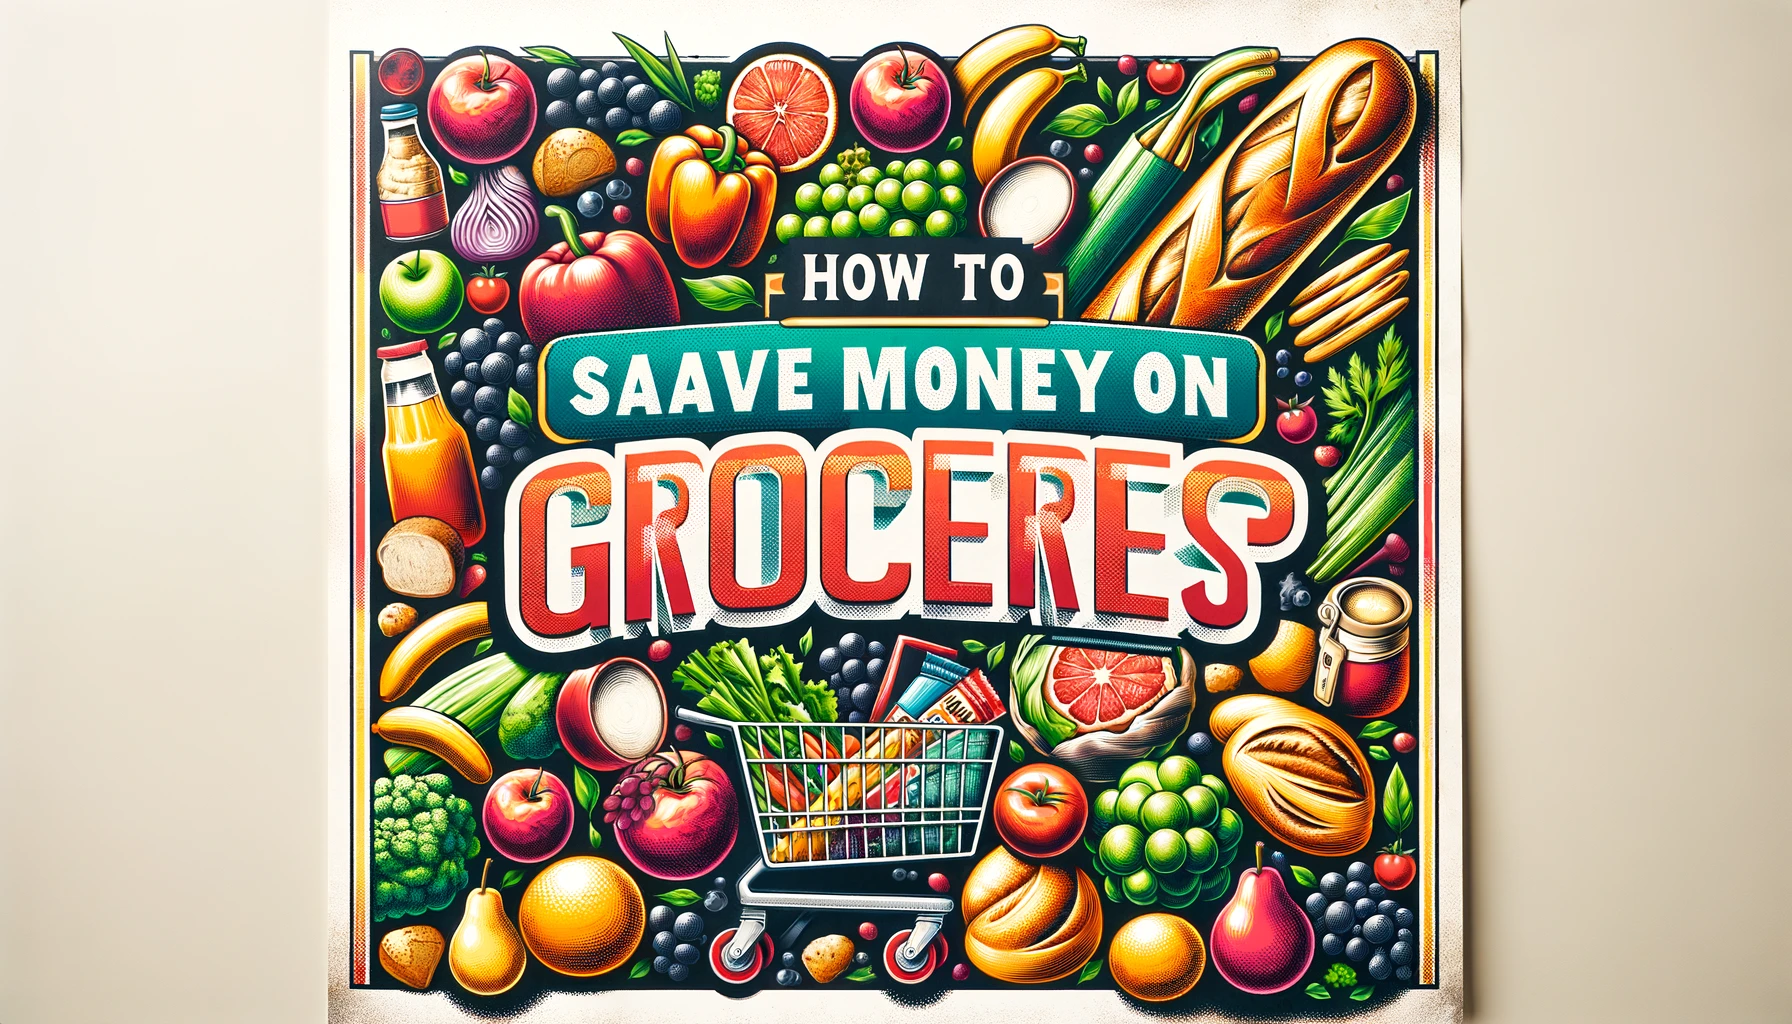 Featured image of an article on How to Save Money on Groceries